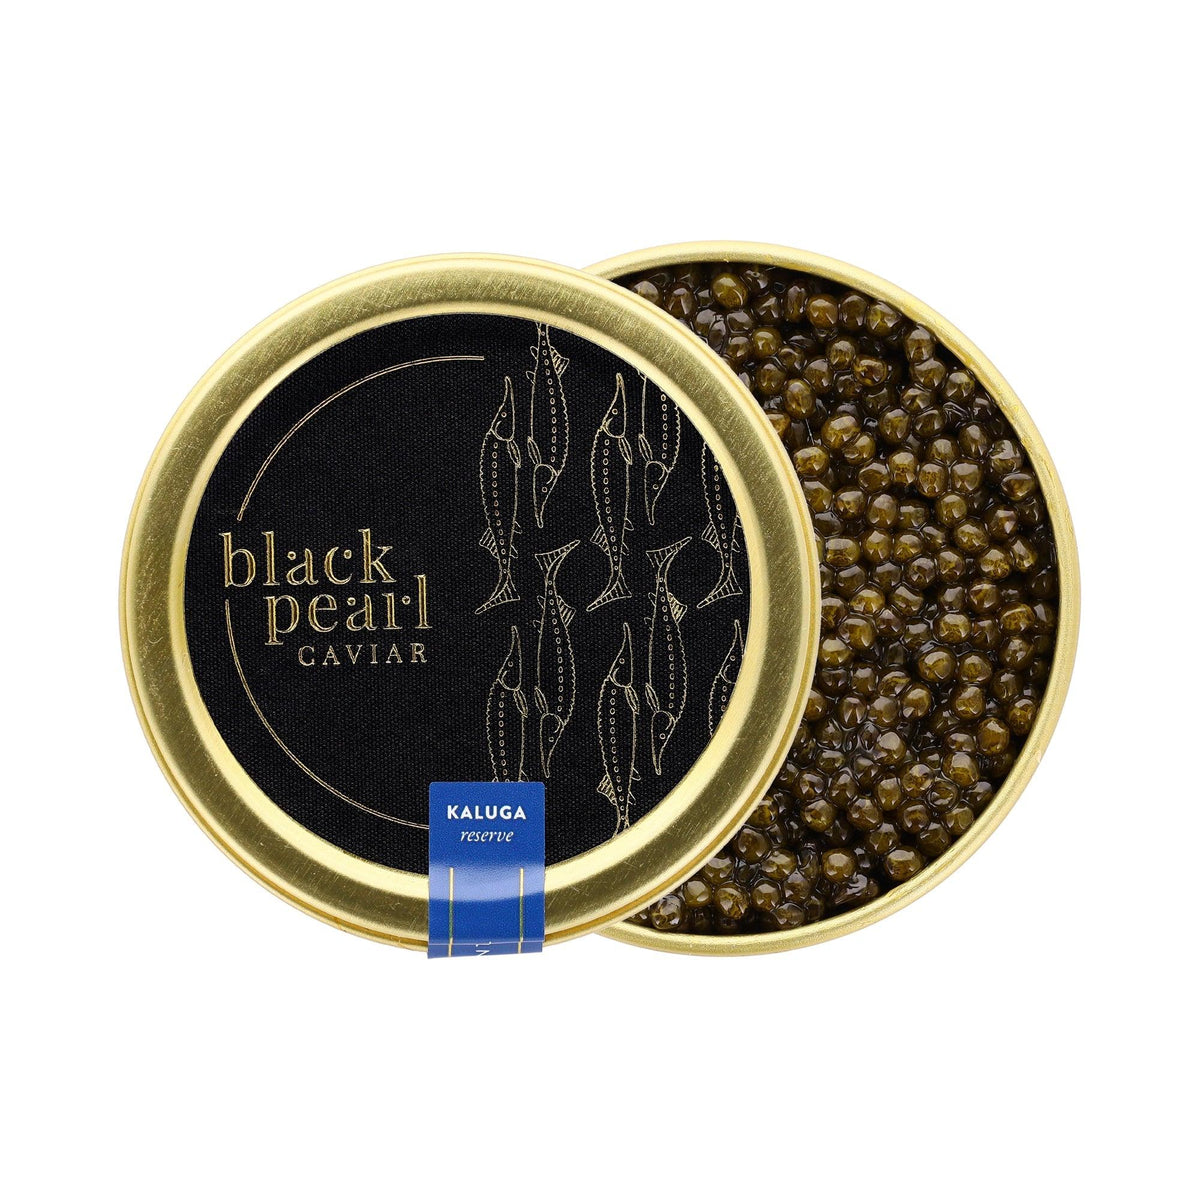 medium size caviar, good value for money, mild nutty taste, green to brown color